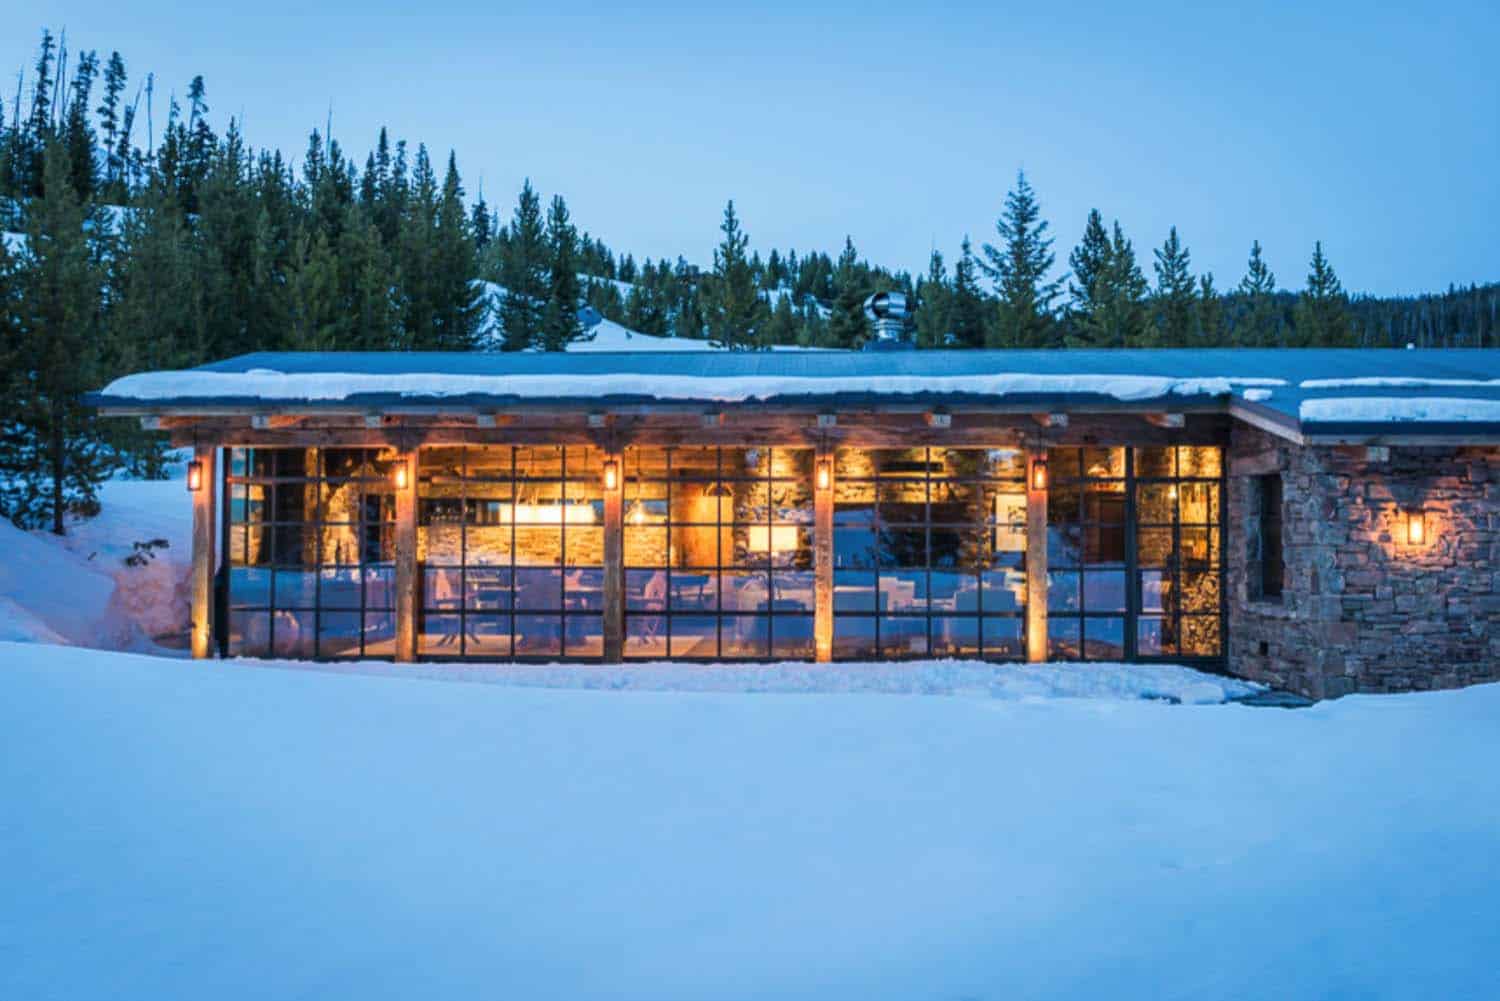 Mountain Guest Cabin-Pearson Design Group-19-1 Kindesign